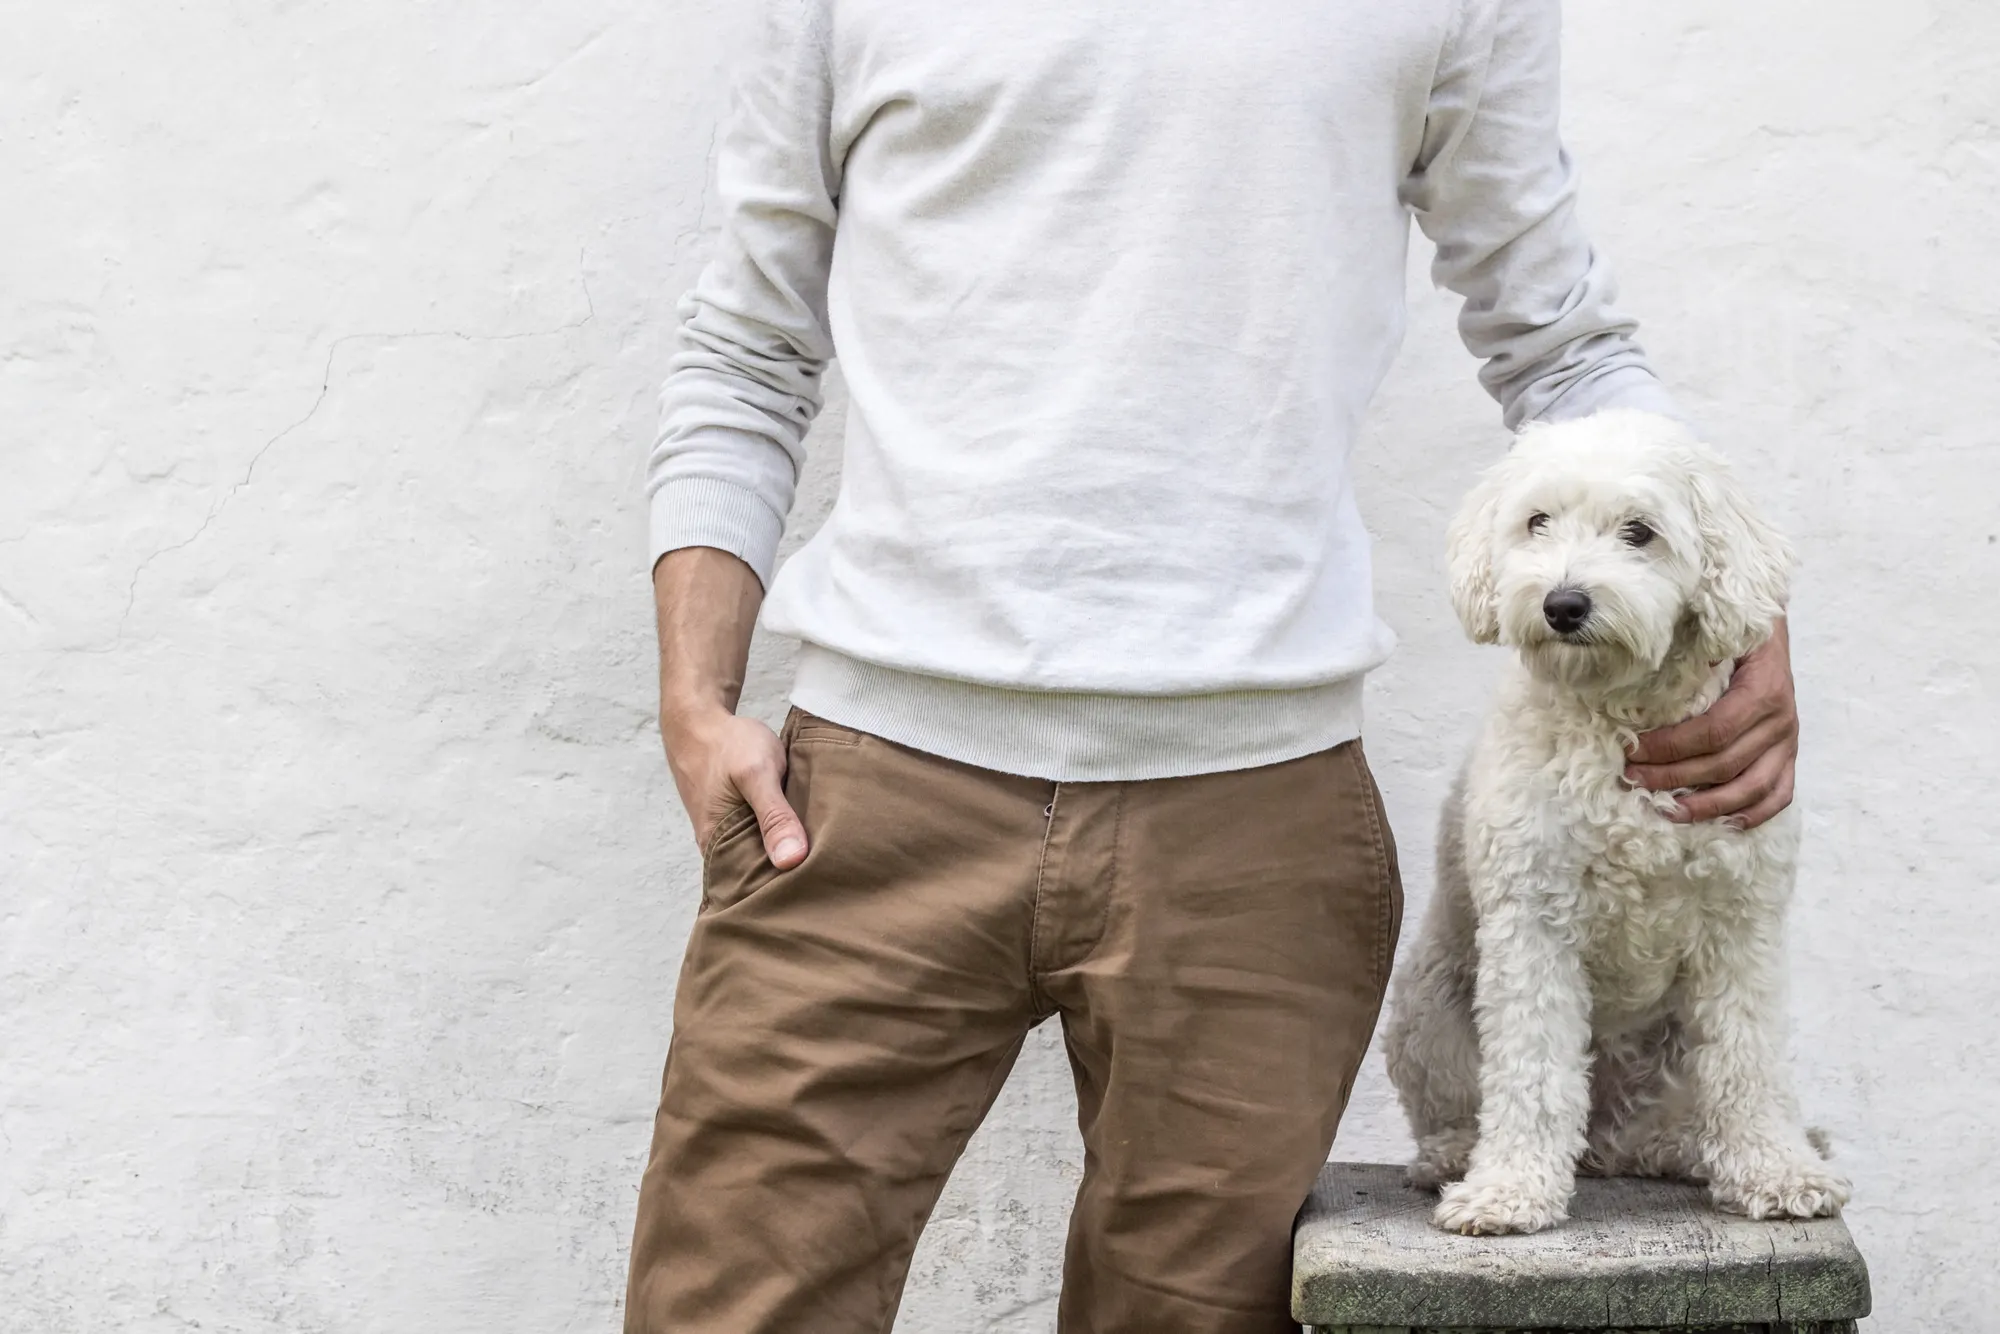 Free to use images: a man standing next to a dog